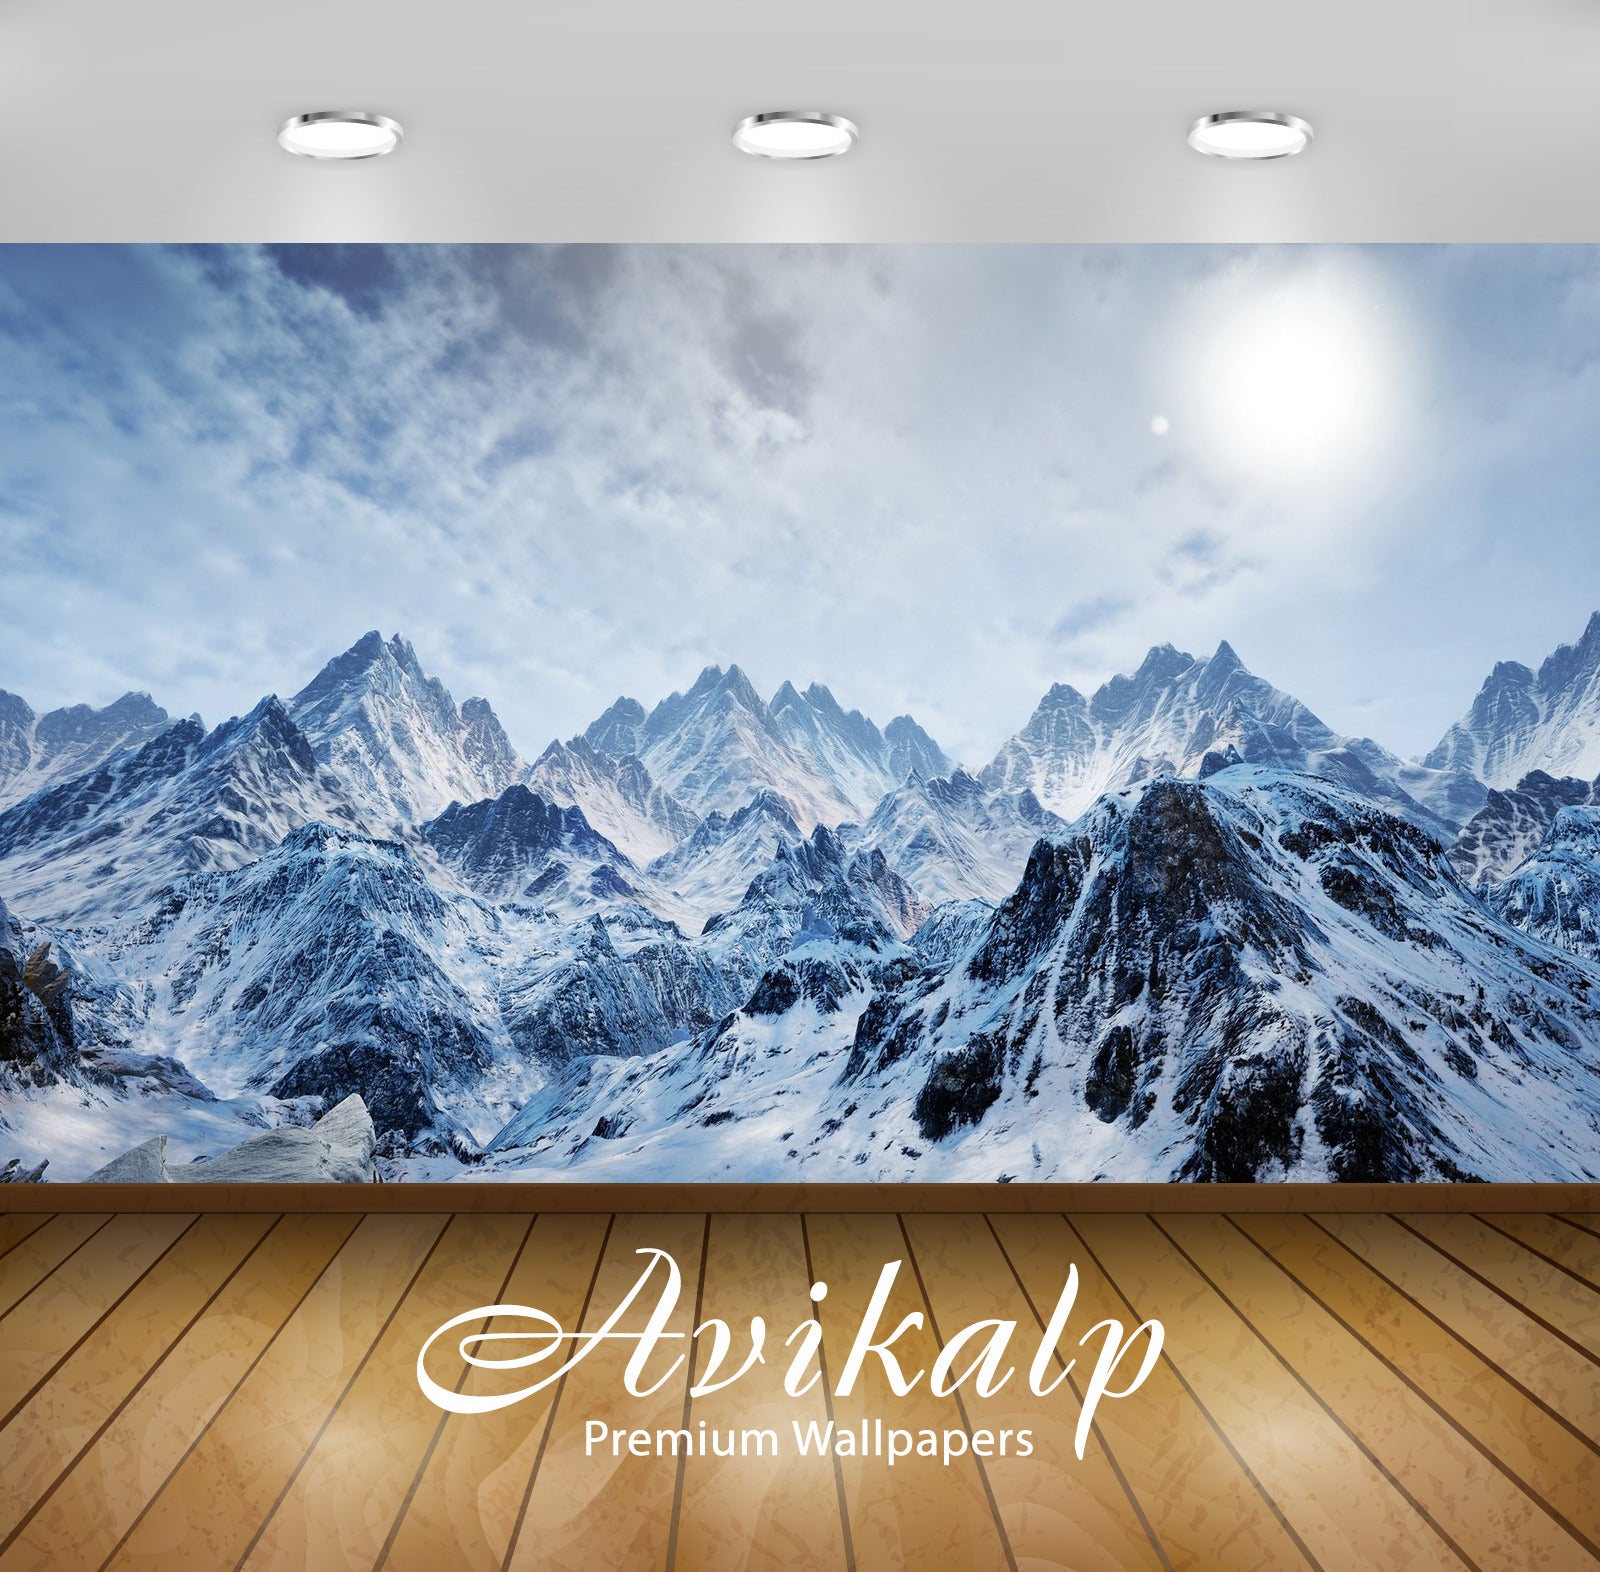 Avikalp Exclusive Awi1812 Beautiful Snowy Mountains Full HD Wallpapers for Living room, Hall, Kids R